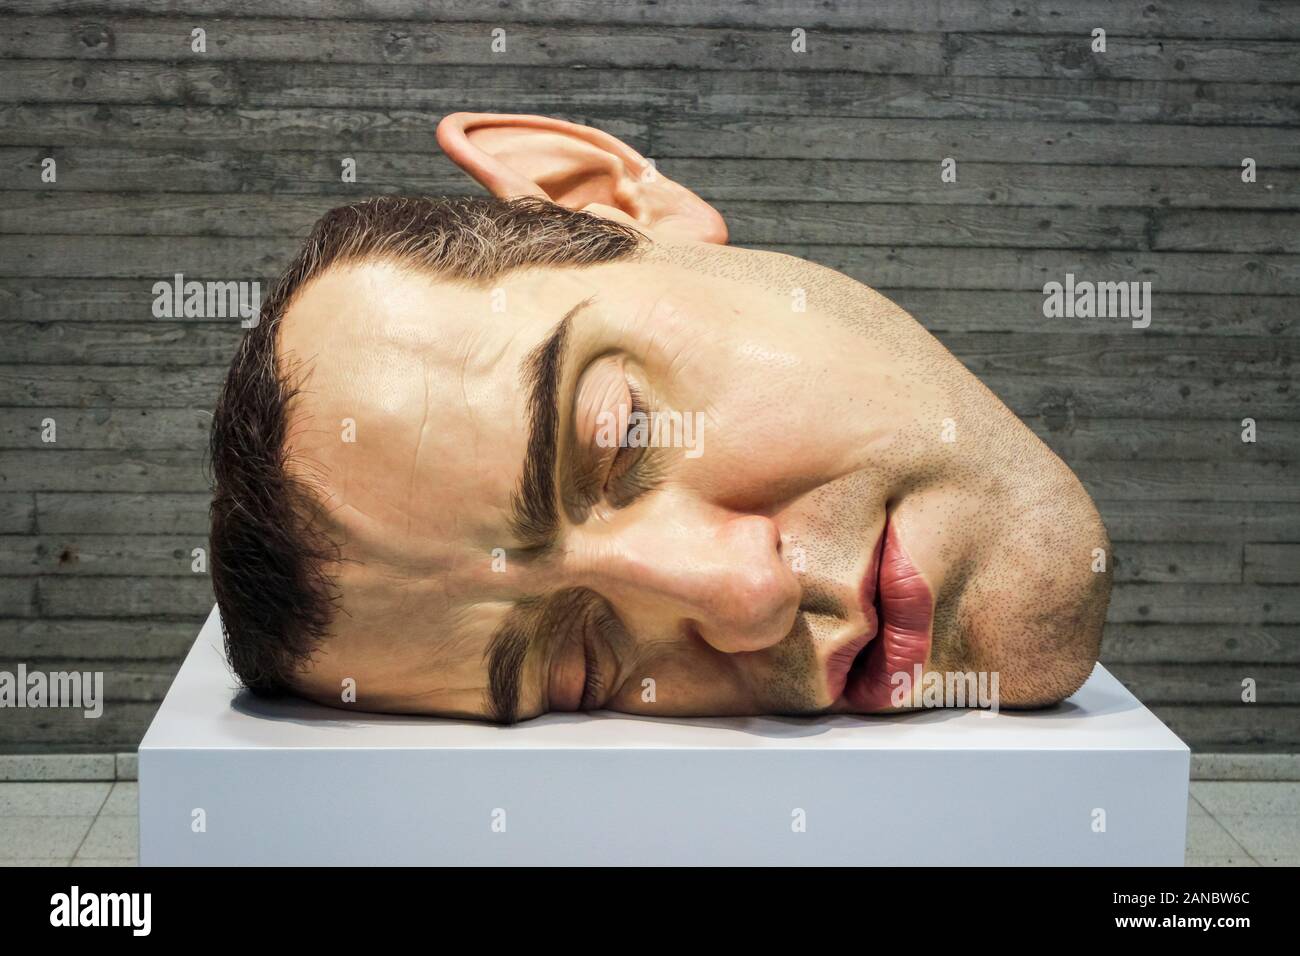 Mask 2, hyperrealistic self-portrait sculpture by Ron Mueck, at Sara Hildén Art Museum in Tampere, Finland Stock Photo